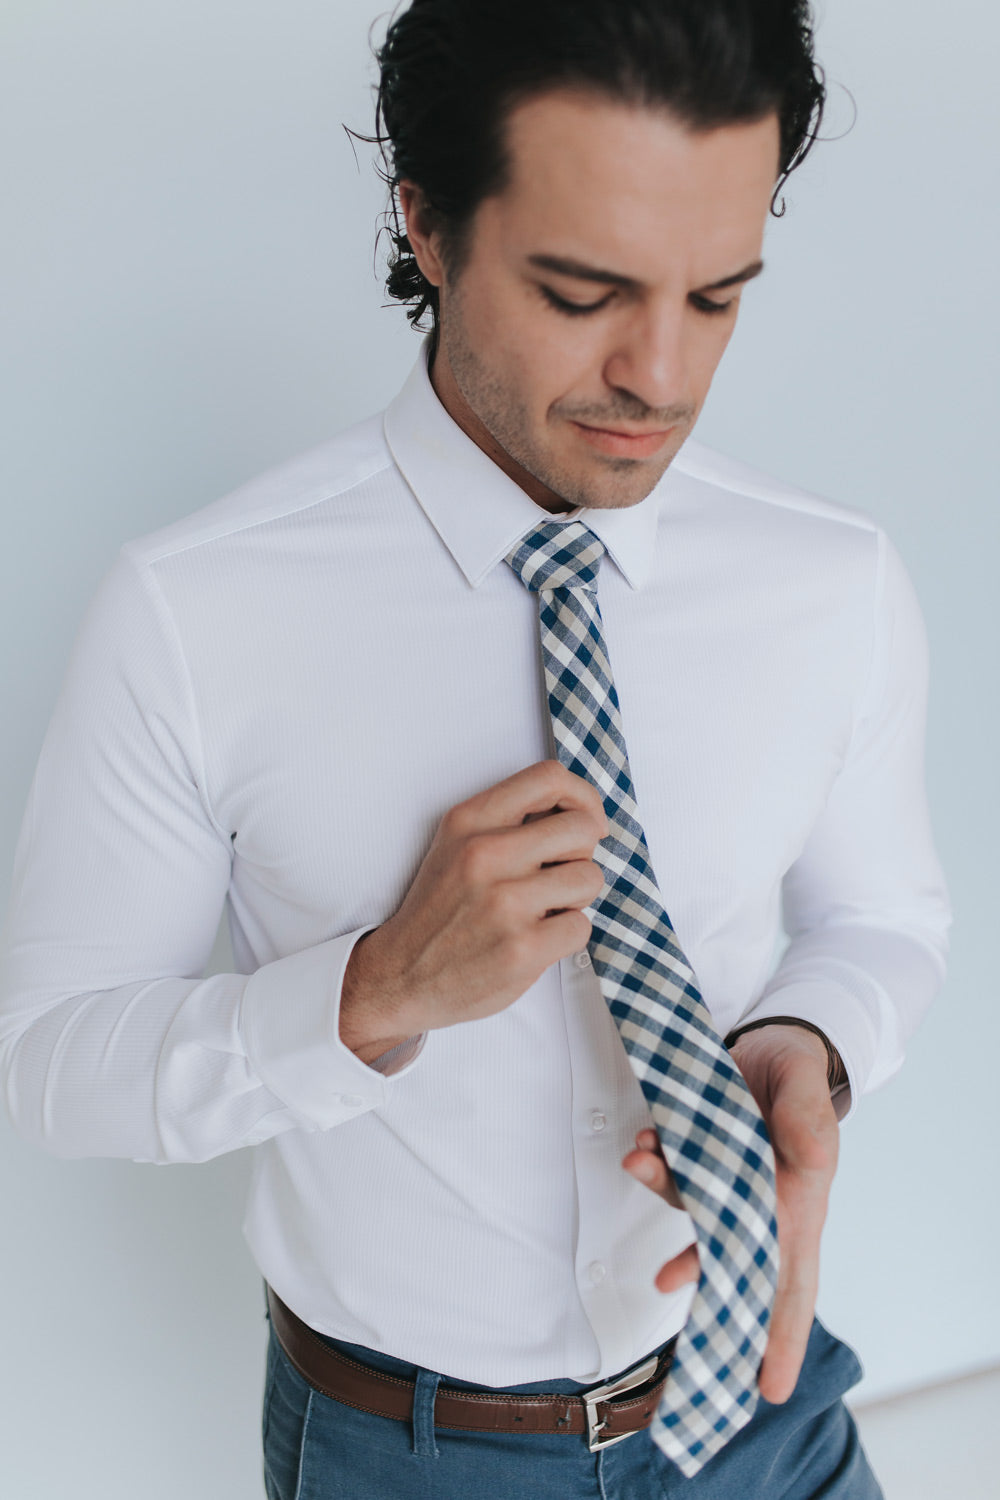 Blazer Tie worn with a white shirt, brown belt and blue pants.